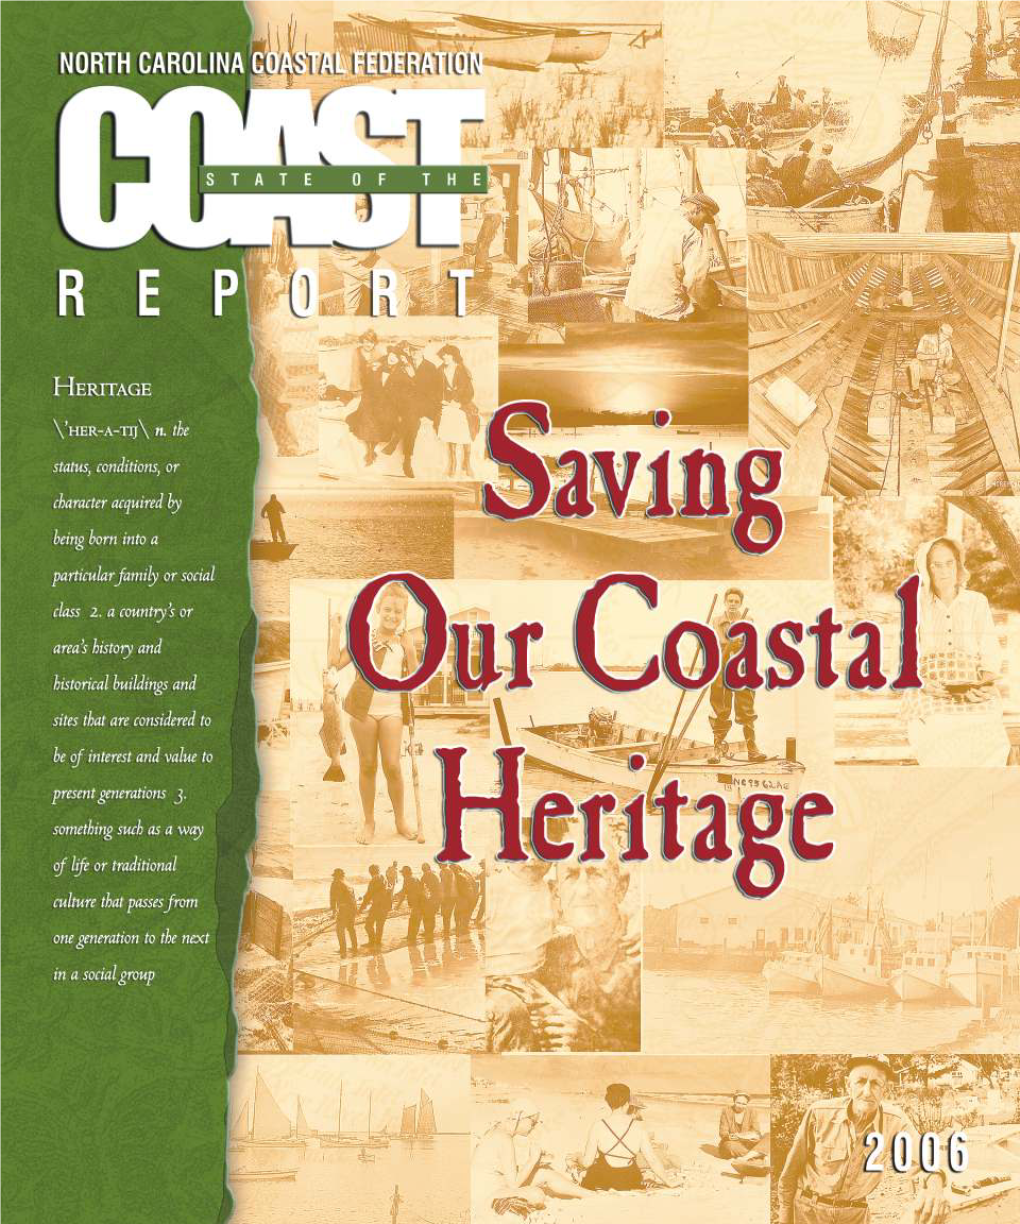 2006 STATE of the COAST REPORT the Trend of Moving Close to the Water